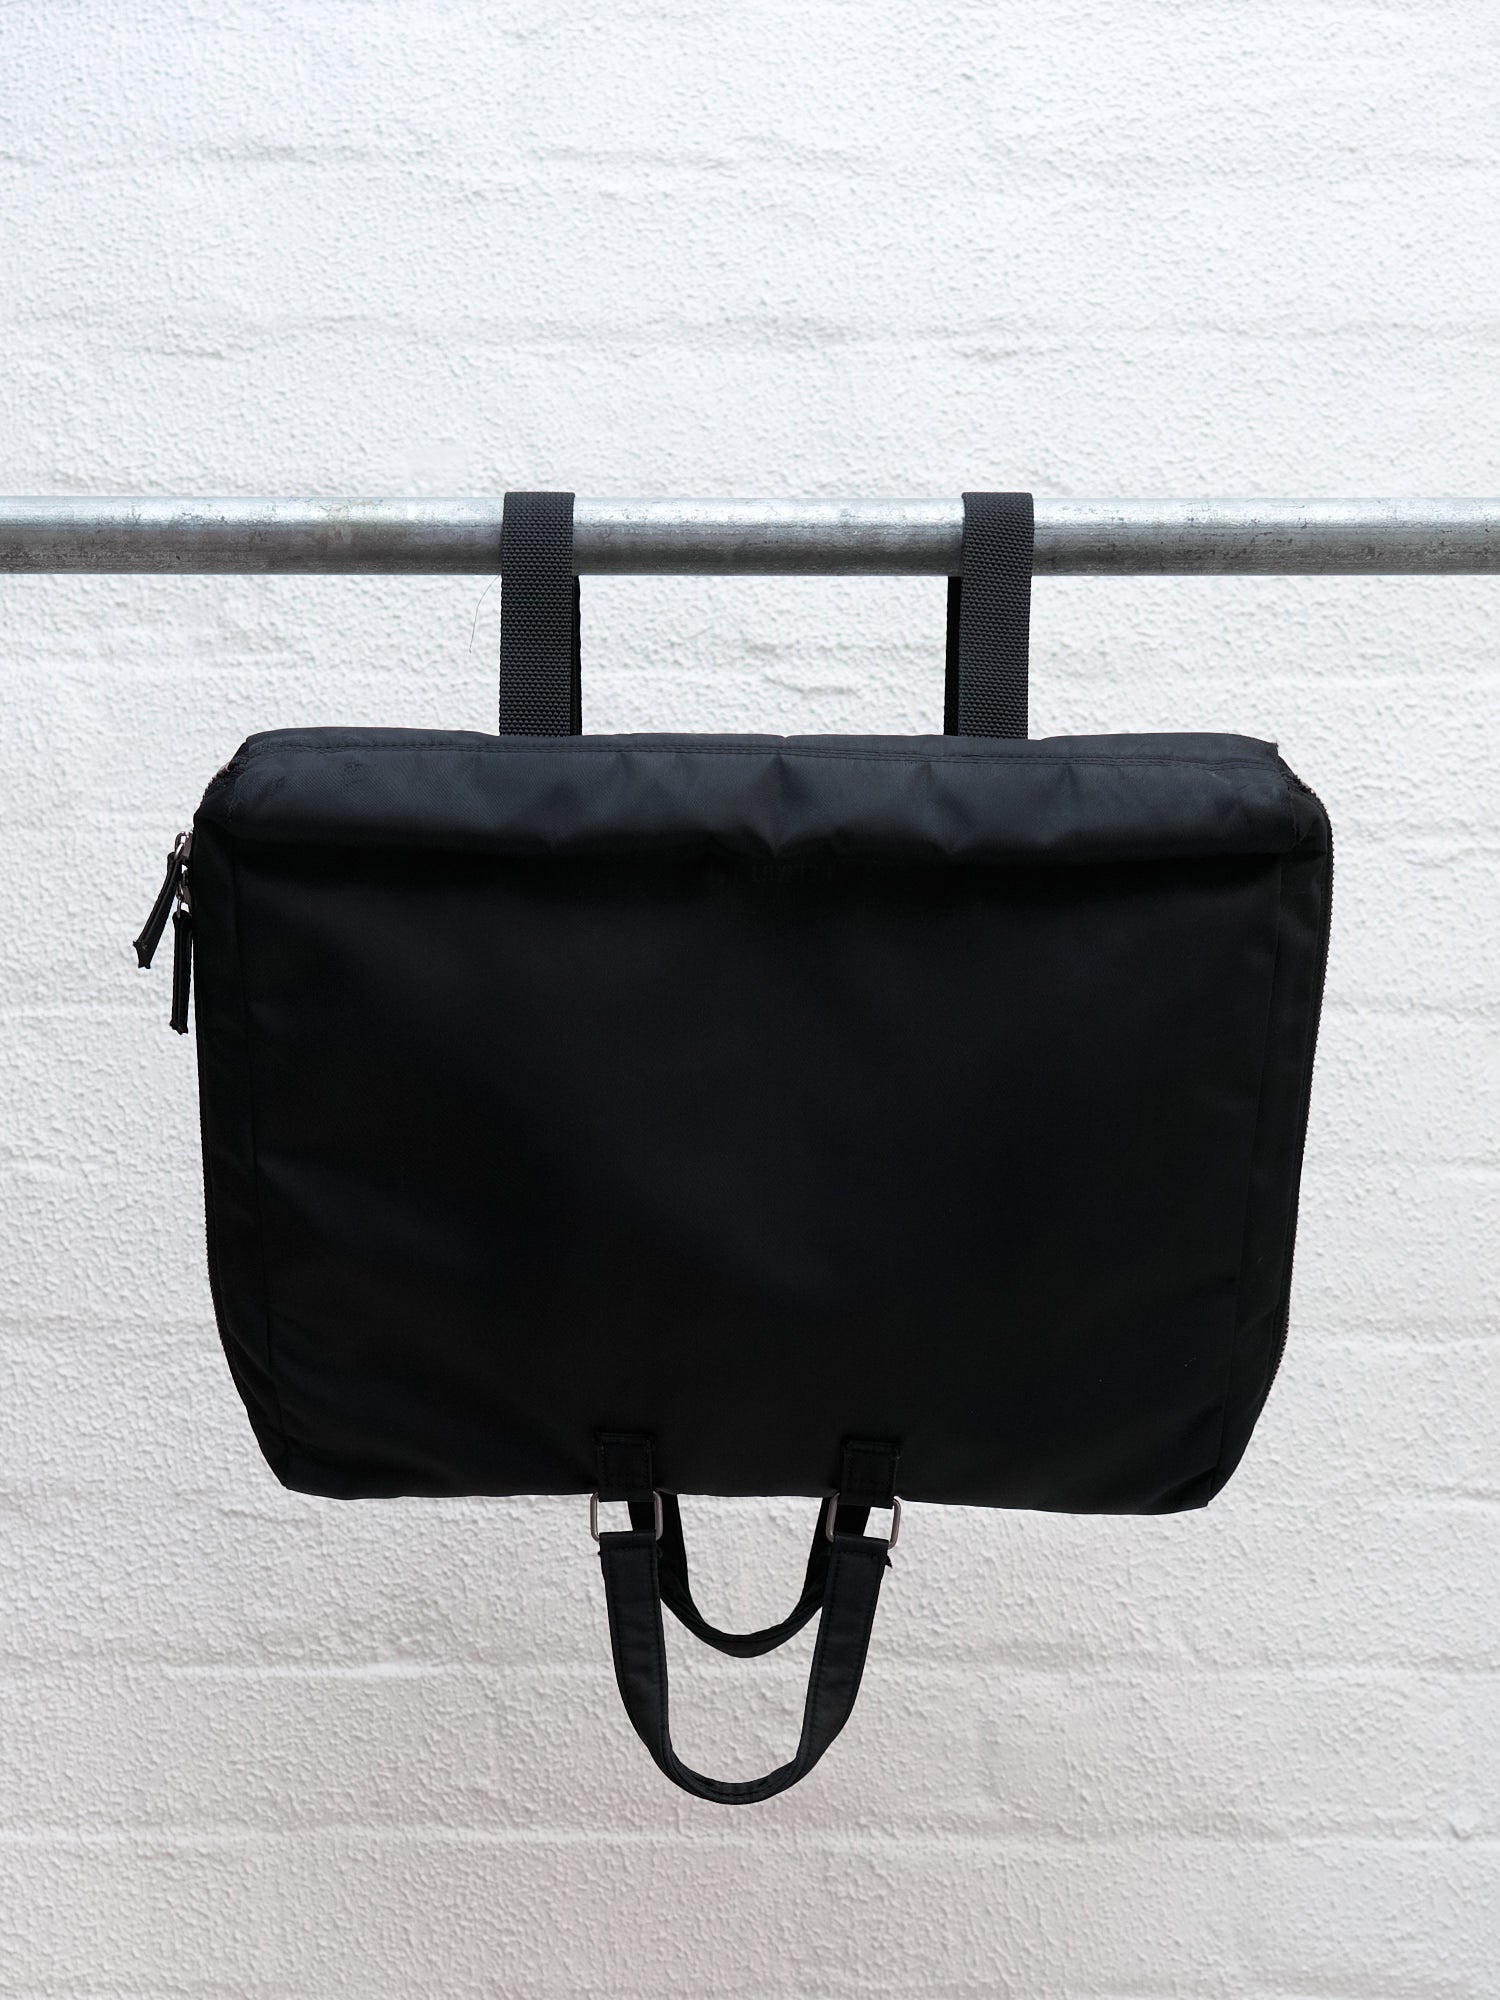 Helmut Lang 1990s-2000s black nylon two way briefcase backpack